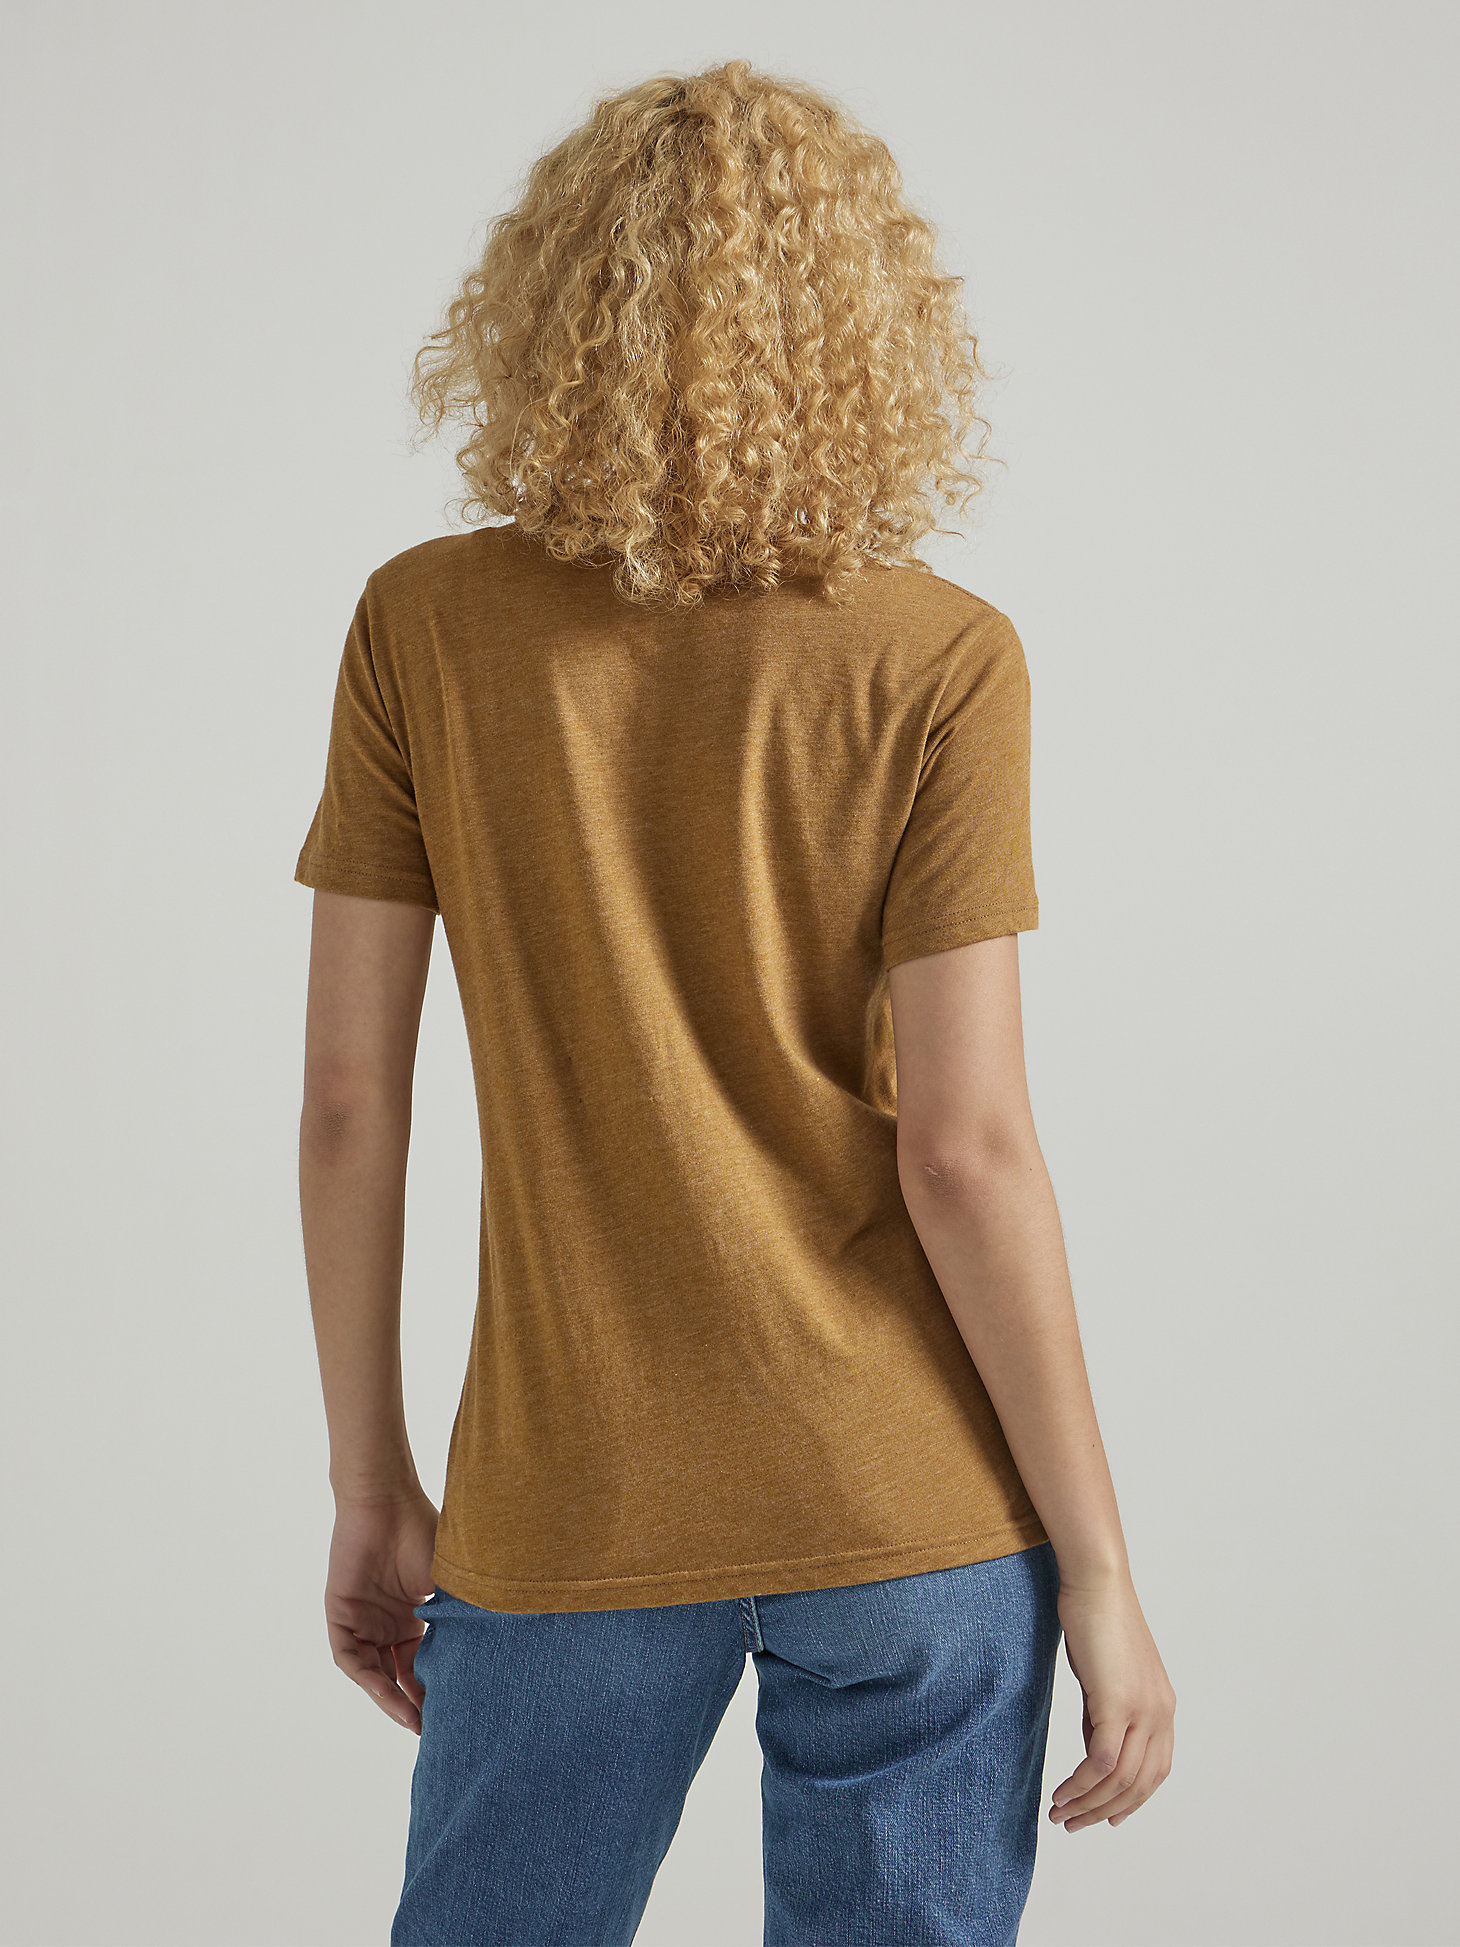 Women's Crafted With Purpose Graphic Tee in Tumbleweed alternative view 1